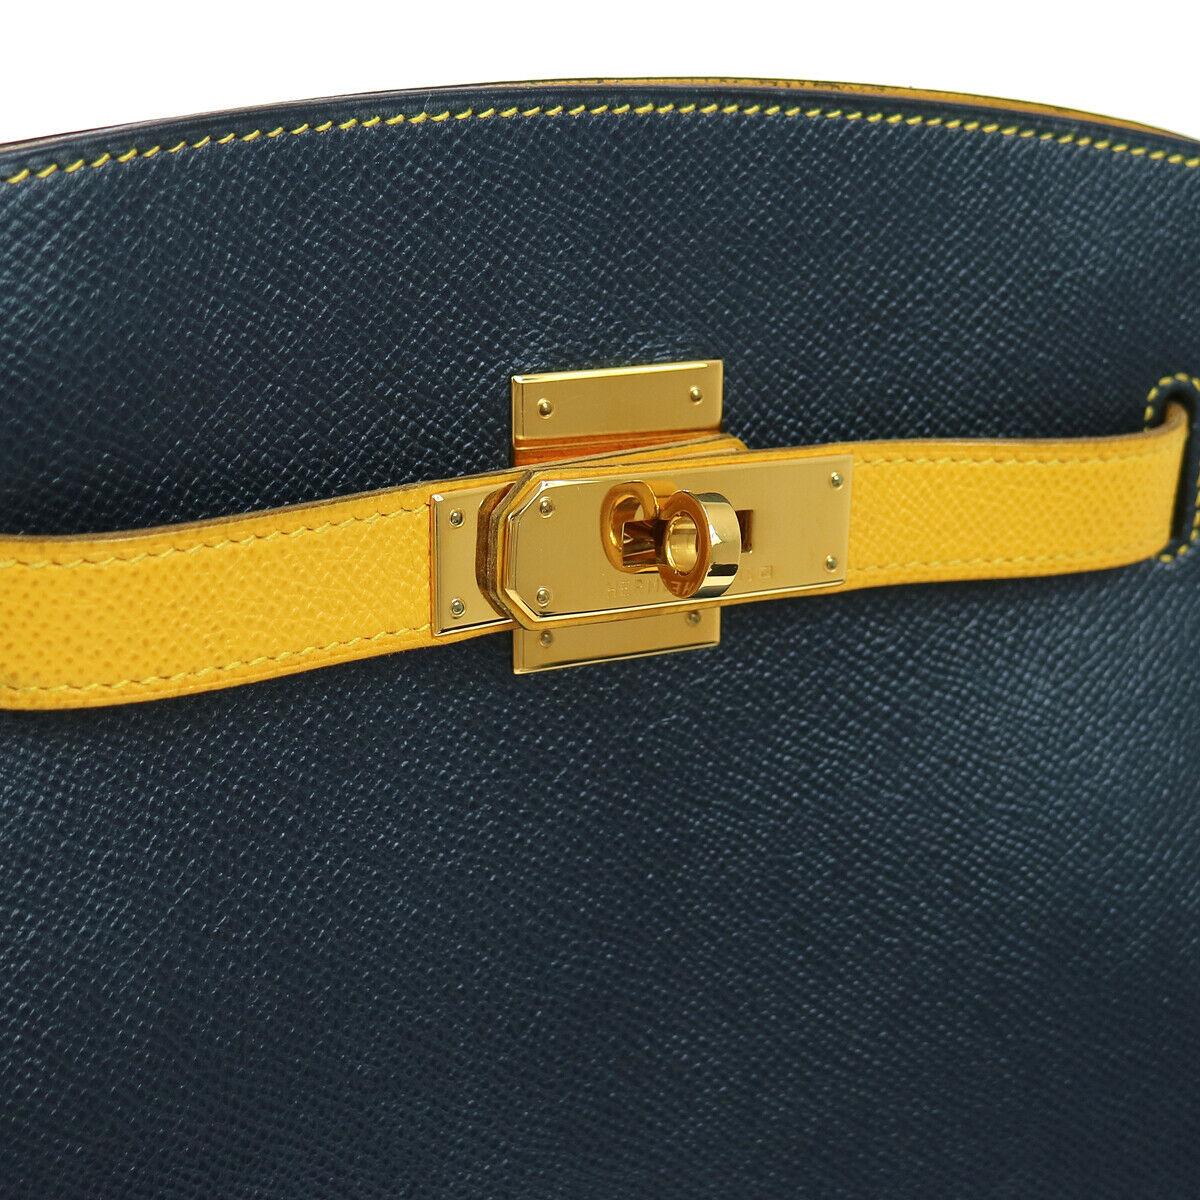 Hermes Navy Blue Yellow Leather Gold Kelly Sport Crossbody Shoulder Bag

Leather
Gold tone hardware
Turnlock closure
Leather lining
Date code present
Made in France
Adjustable shoulder strap drop 15-16